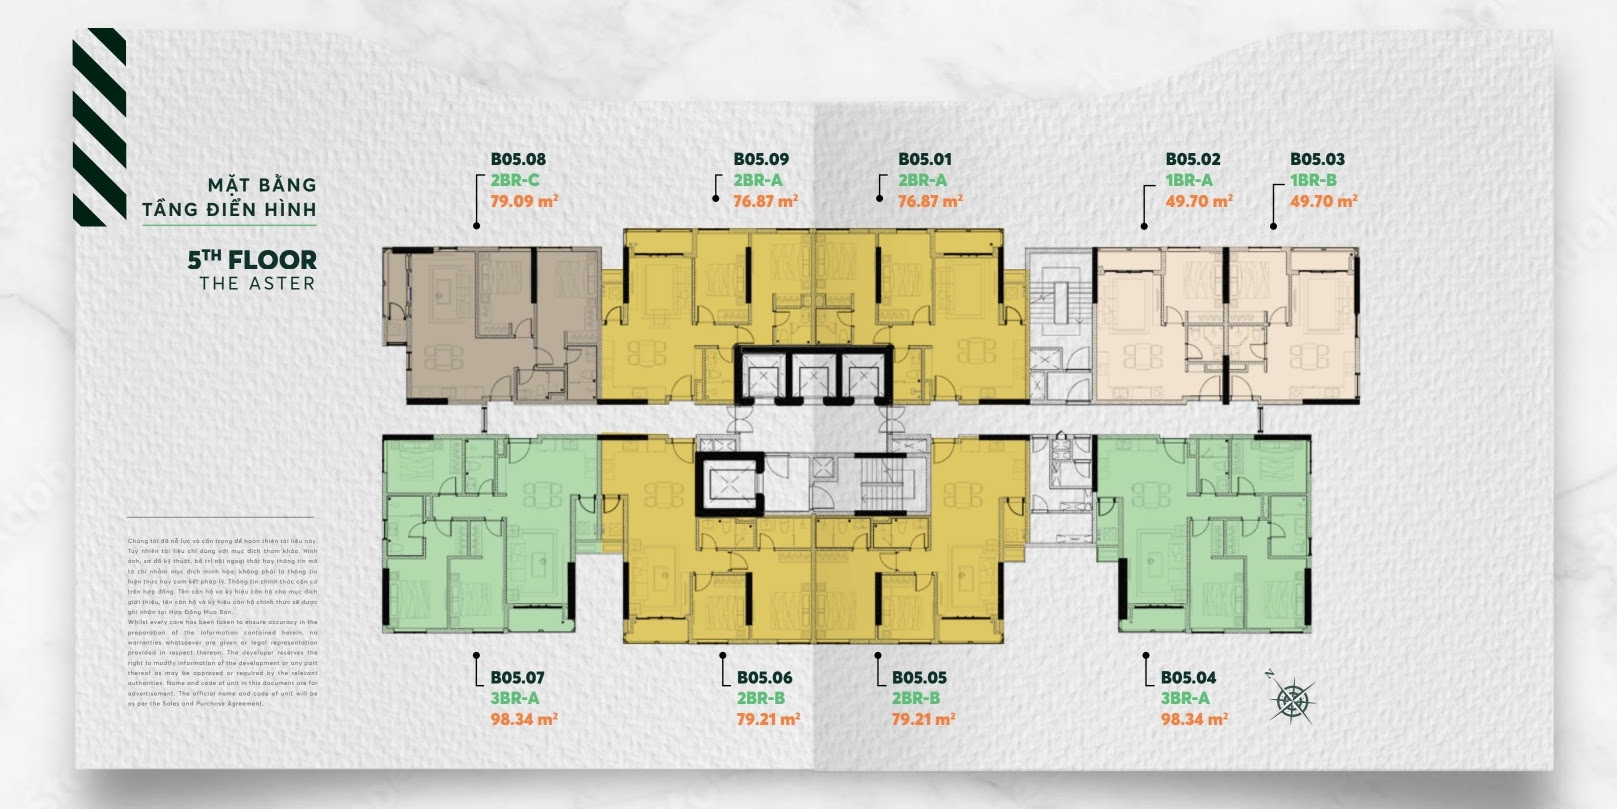 Typical floors will have layouts of 1-3 bedrooms